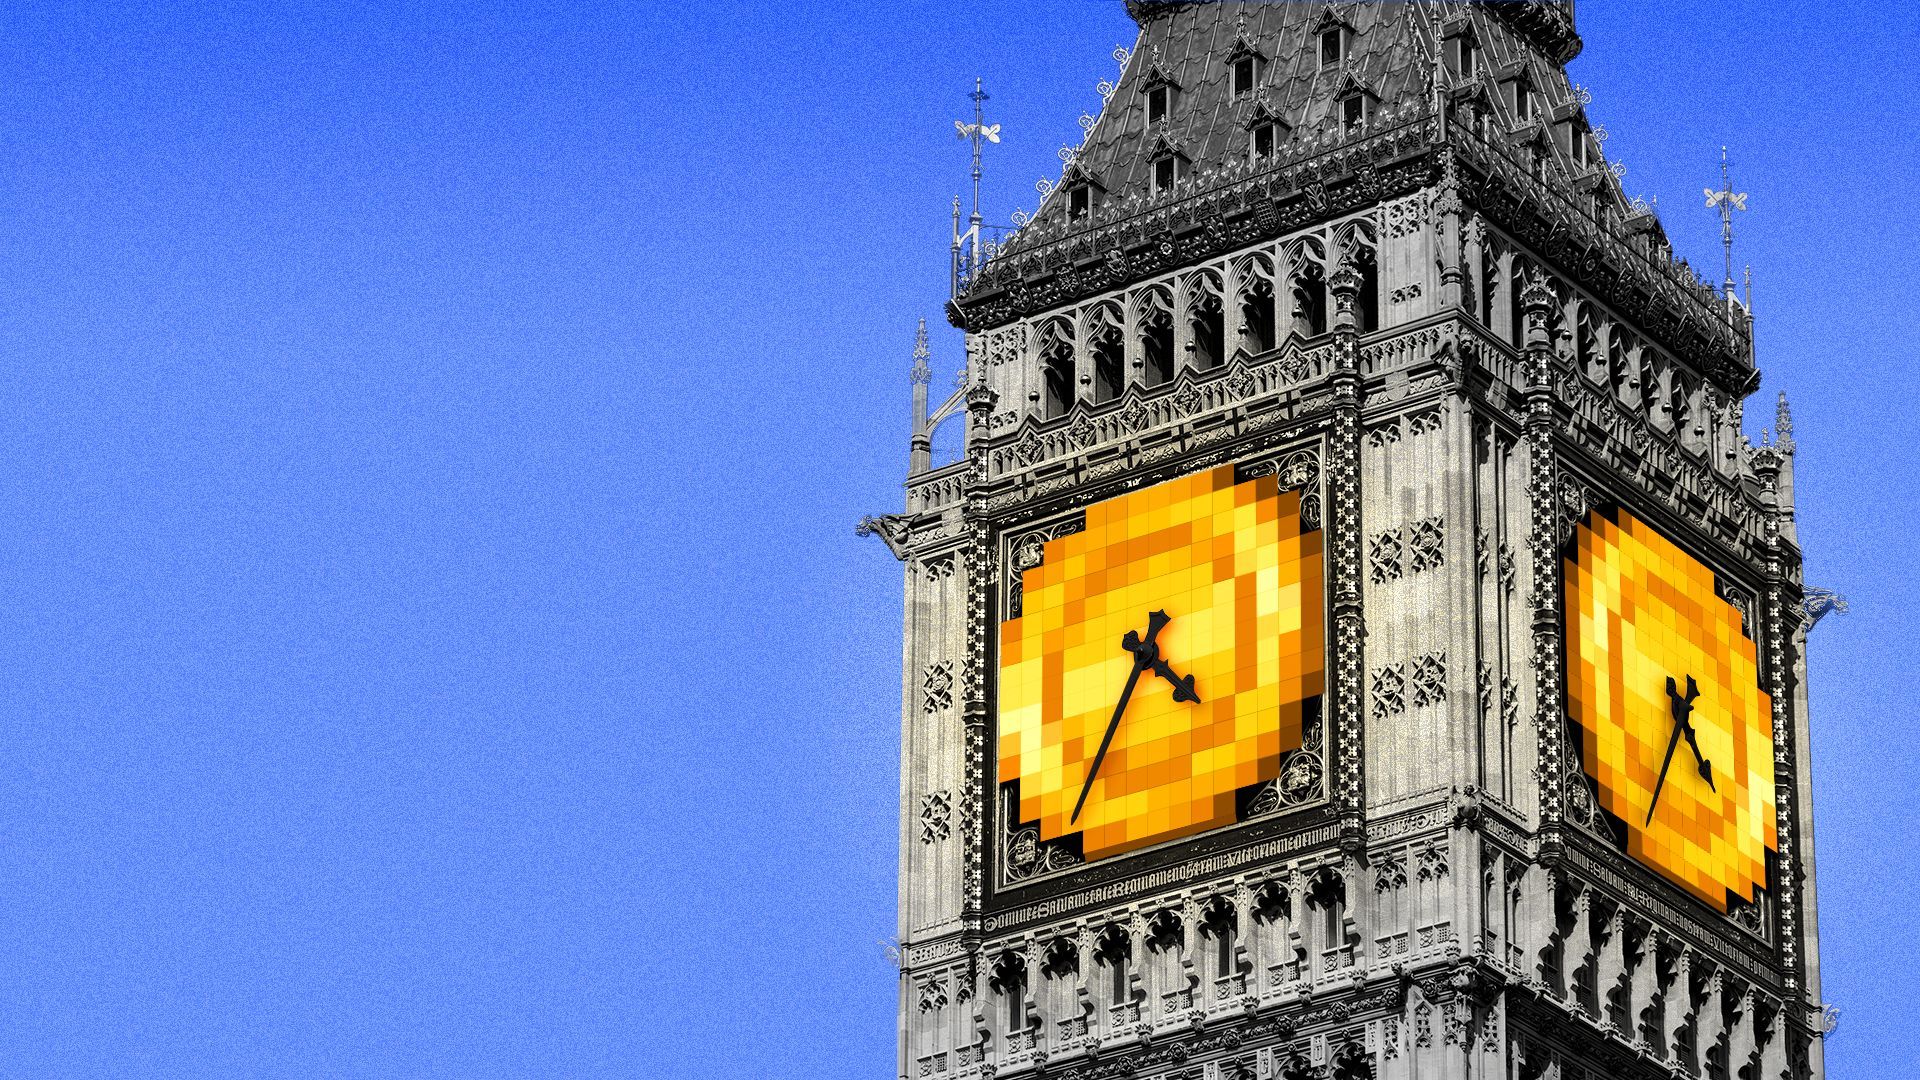 Illustration of Big Ben with digital coin clock faces.